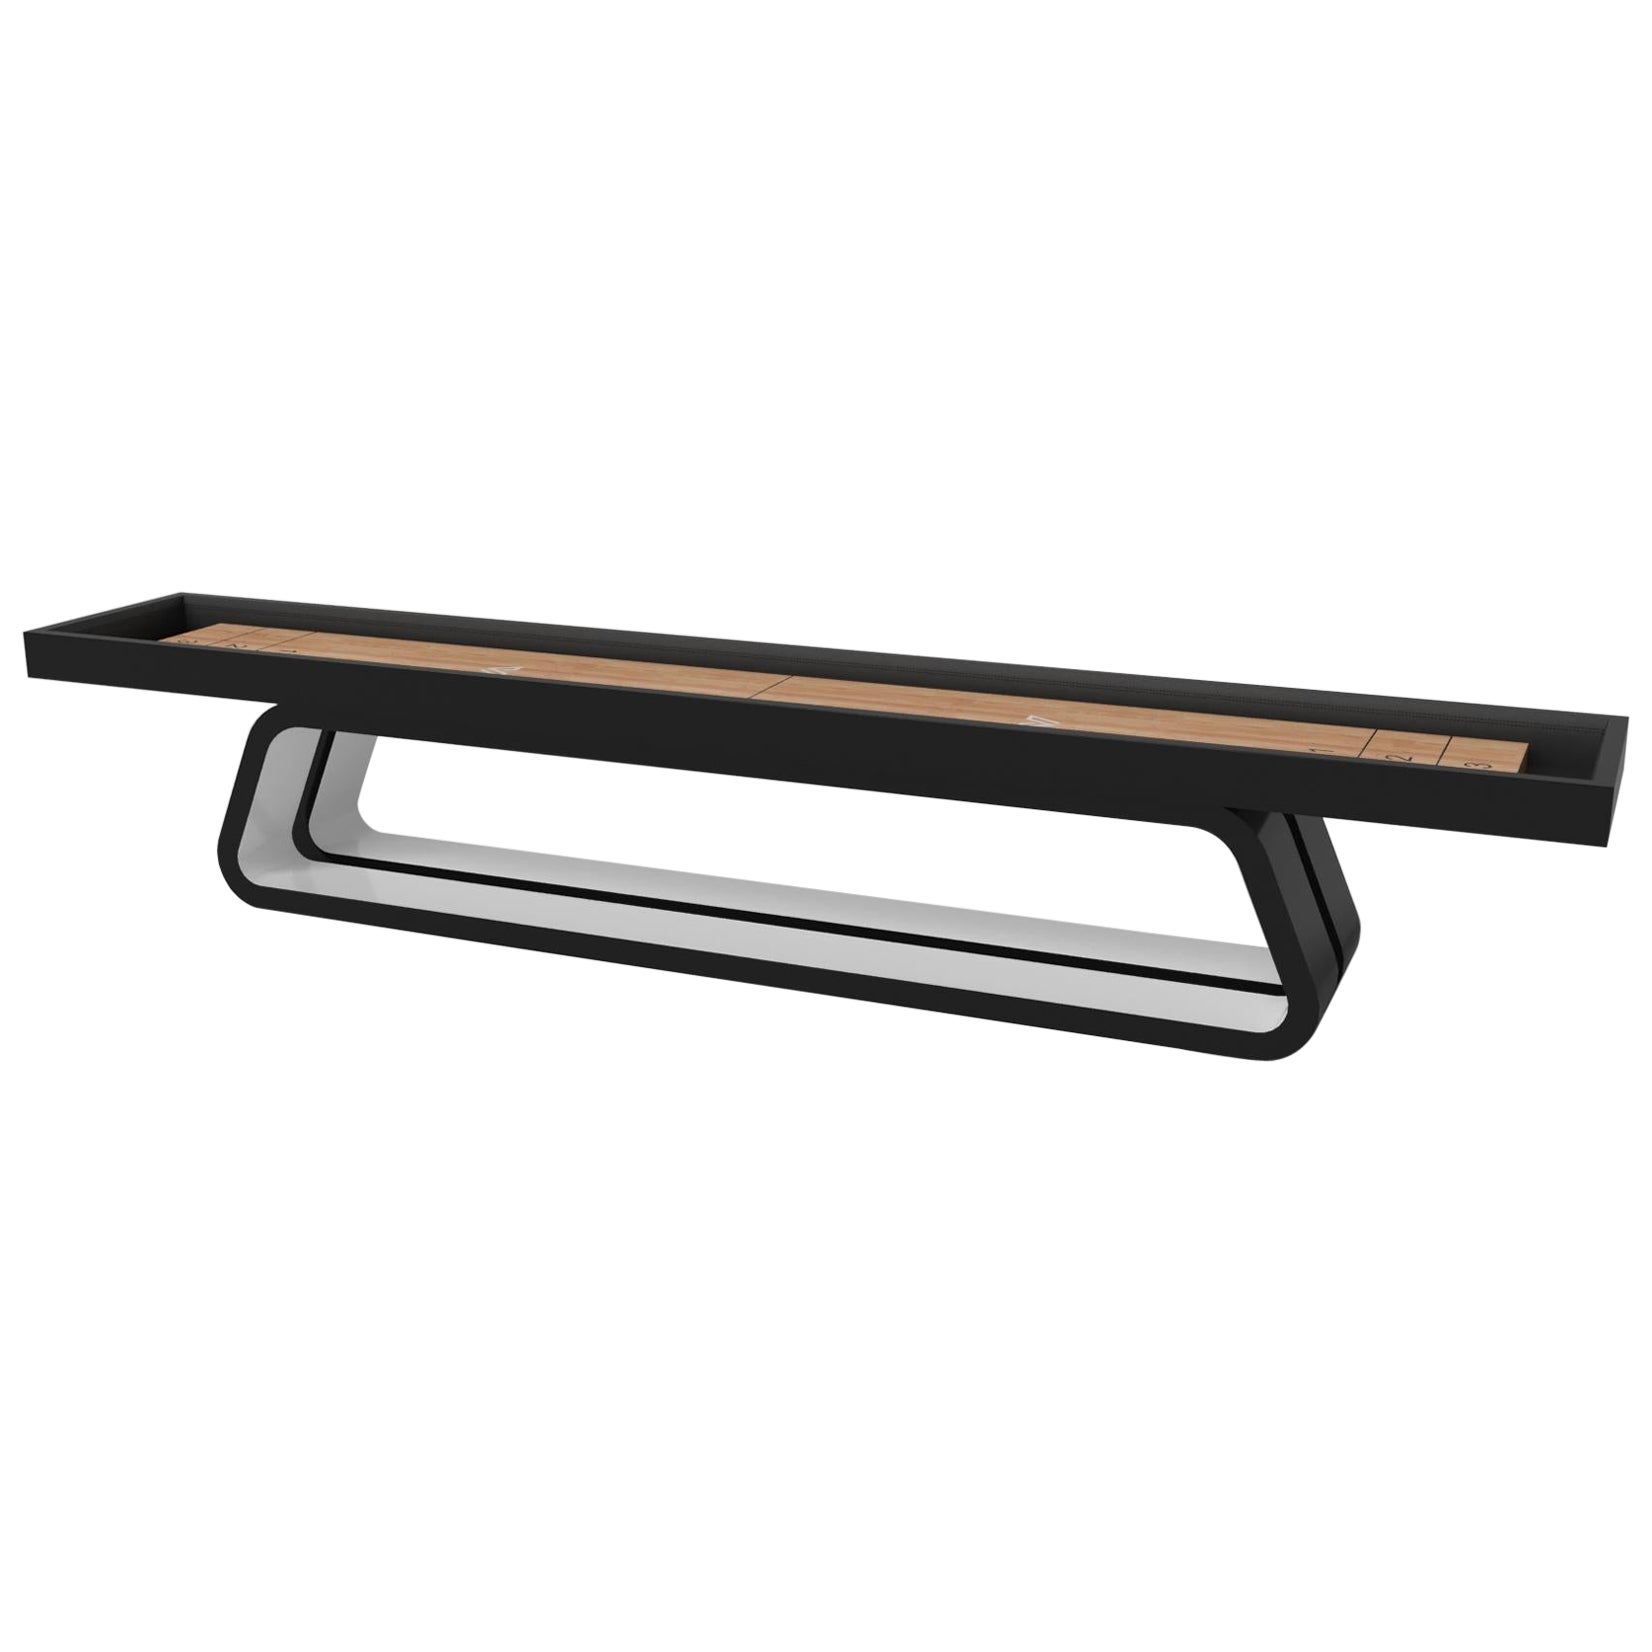 Elevate Customs Luge Shuffleboard Tables / Solid Pantone Black Color in 16' -USA